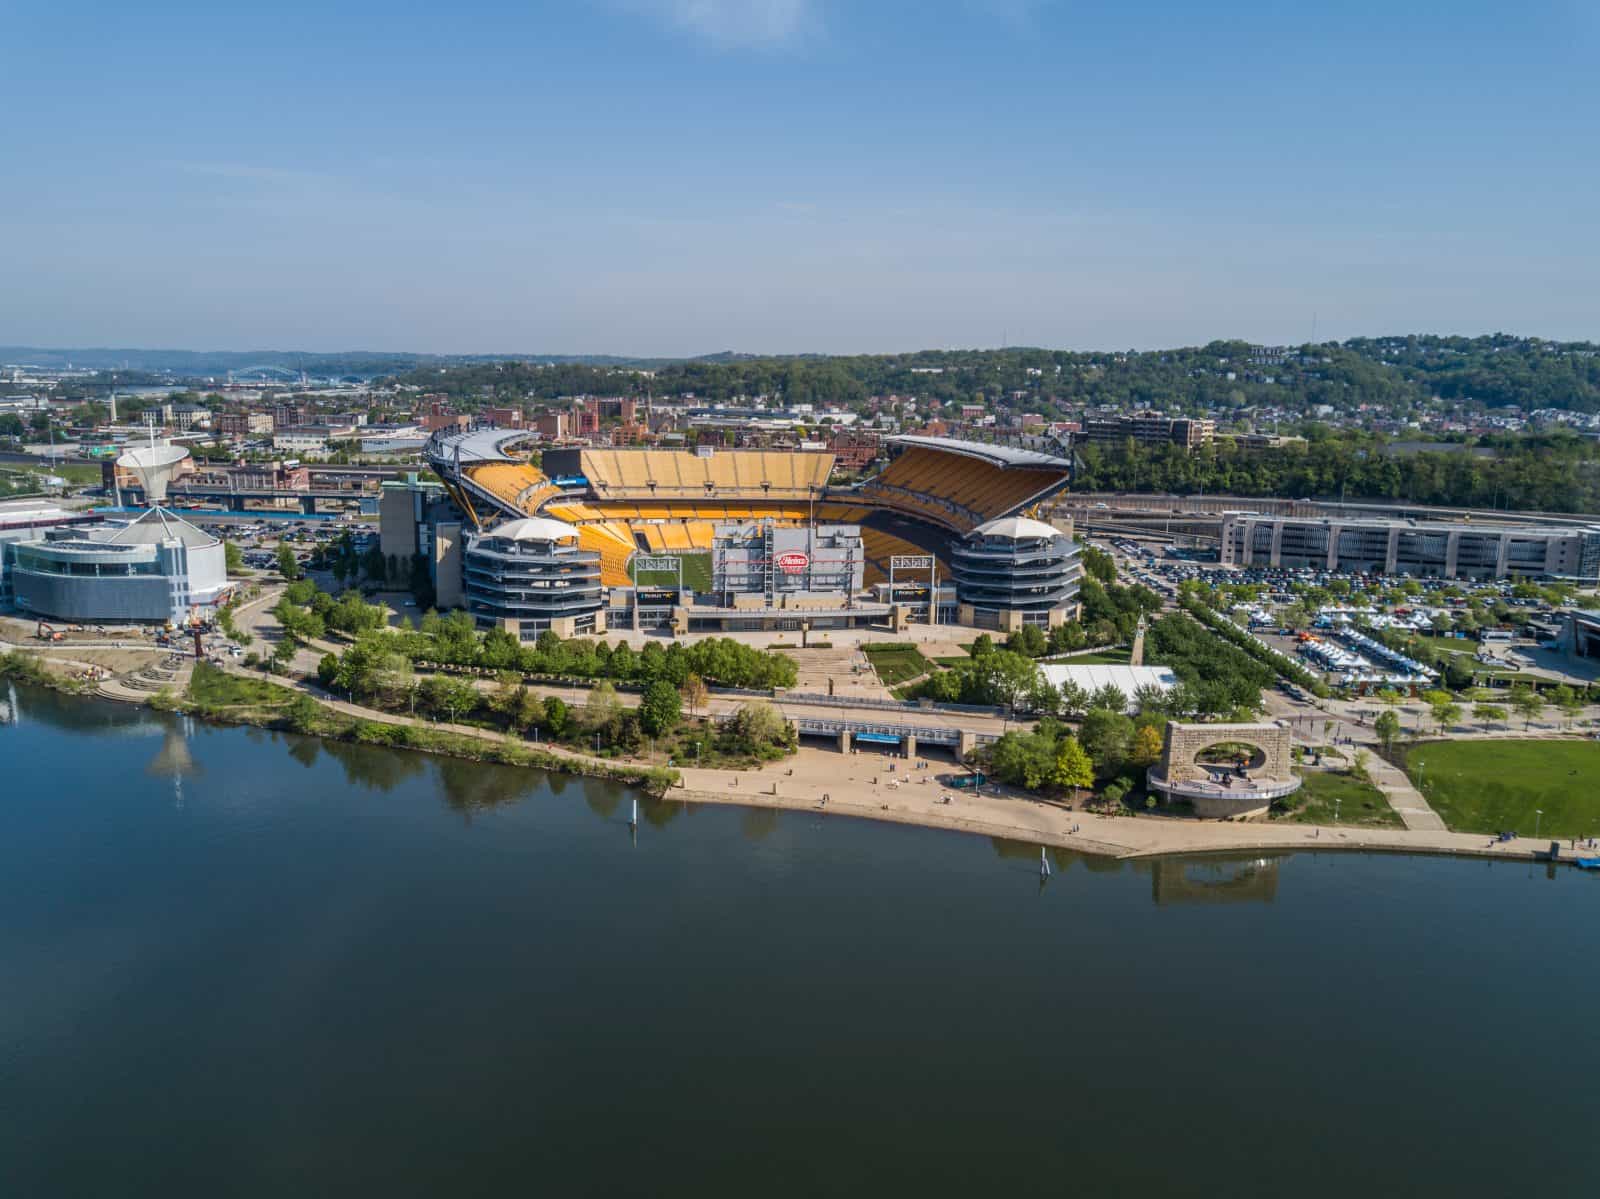 Aerial Drone Photos of the Home of the Pittsburgh Steelers - Heinz Field